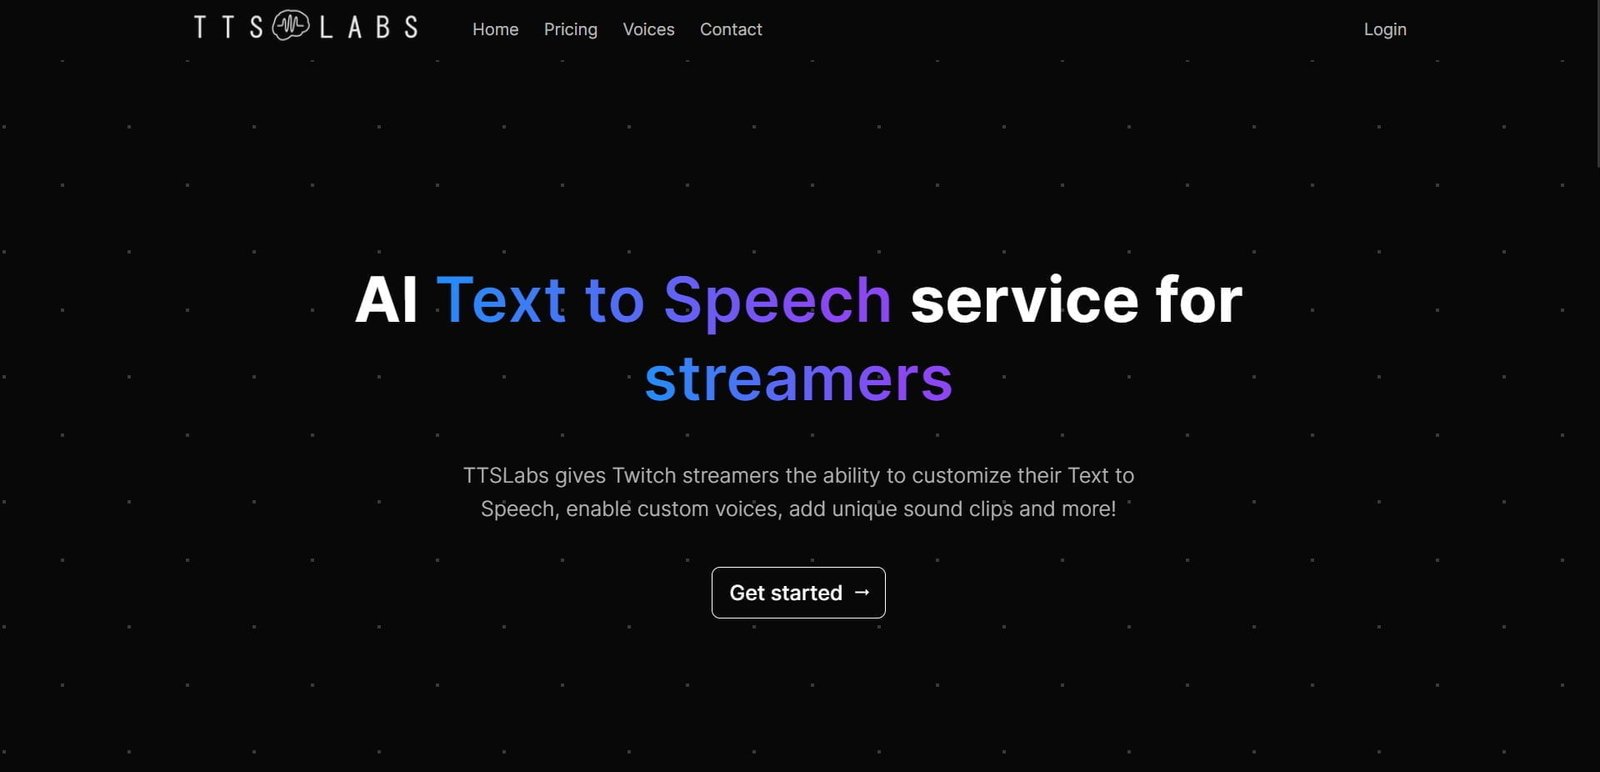 TTSLabs is an AI text-to-speech (TTS) service specifically for Twitch streamers. It enables content creators to customize their TTS experiences